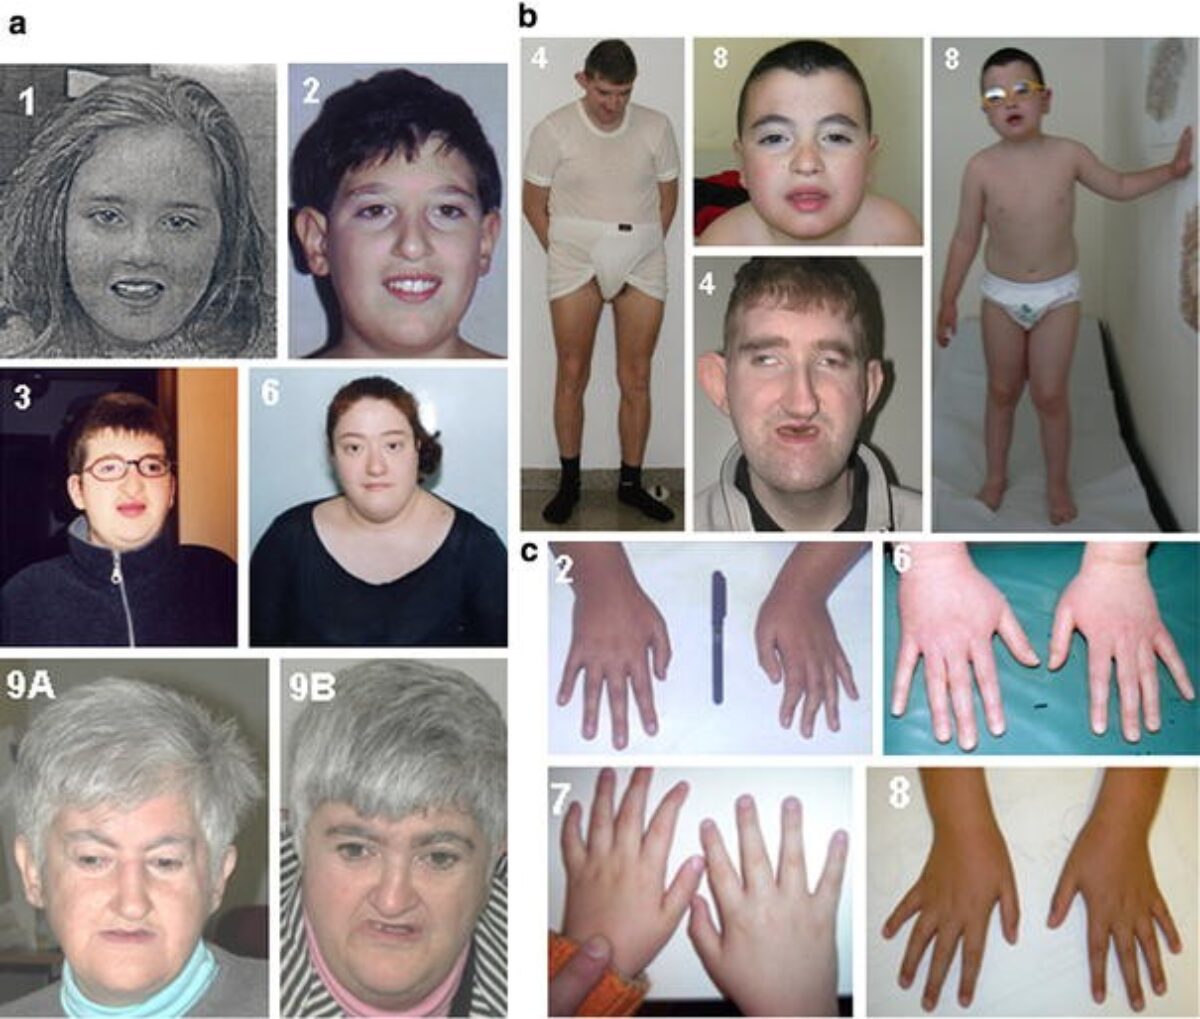 Small and short hands in girl with Cohen syndrome.